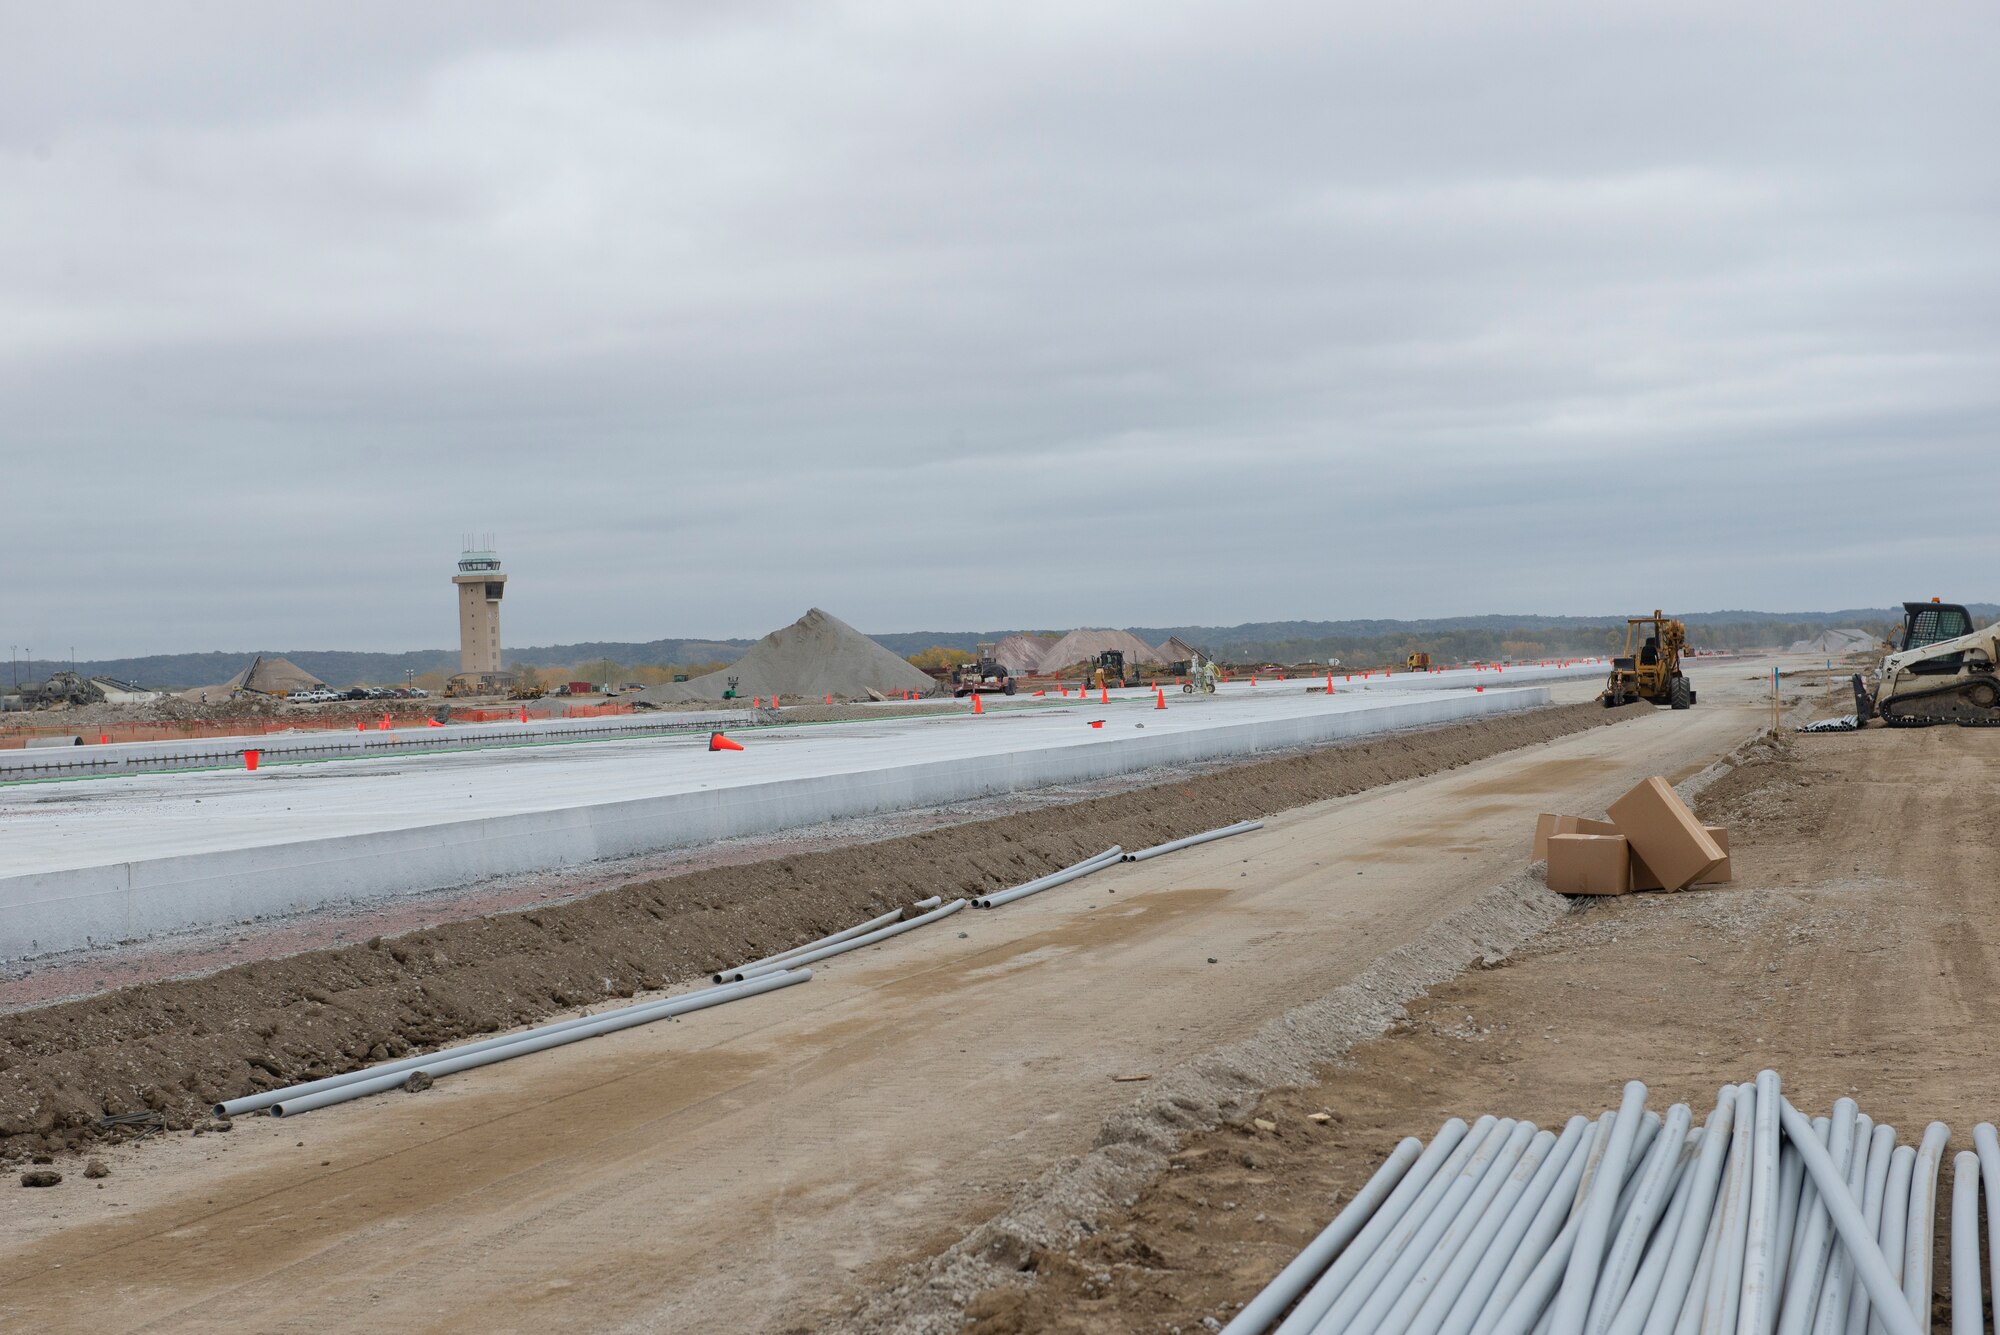 Long shot of construction site showing equipment, tools, dirt, and partial concrete runway